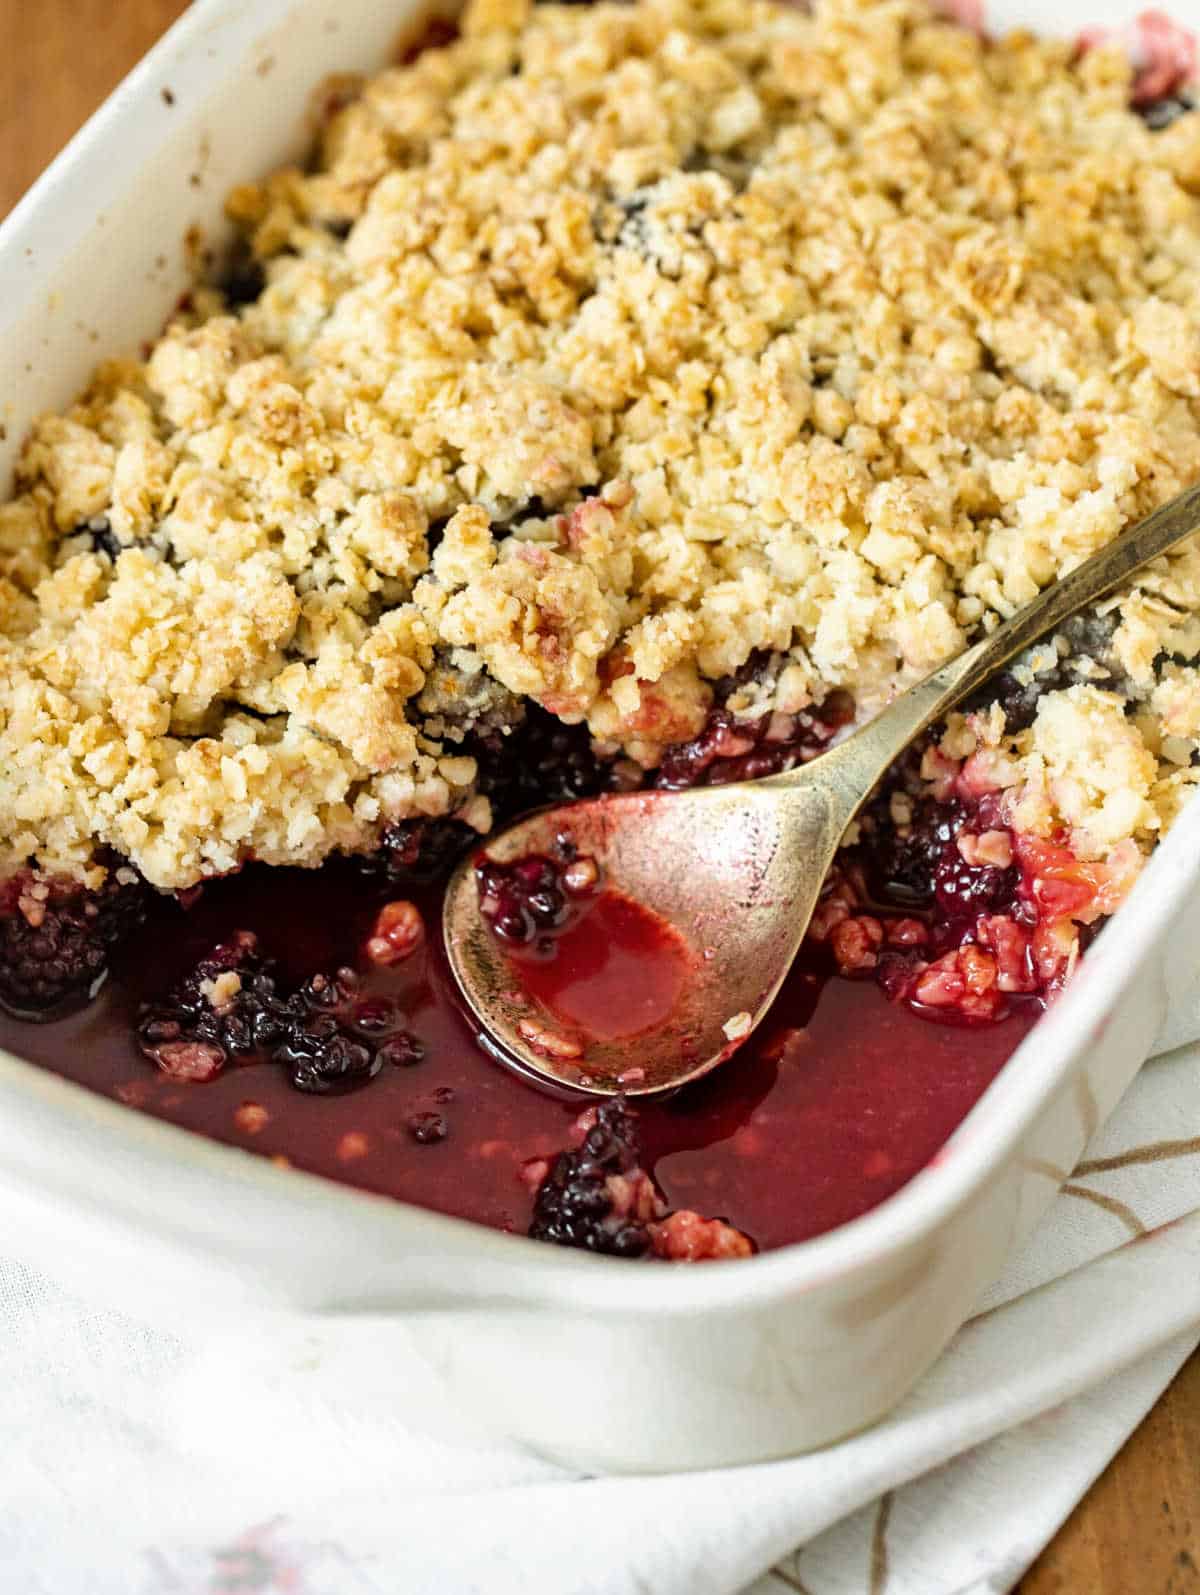 Eaten blackberry crisp on a whitish dish with a spoon inside.